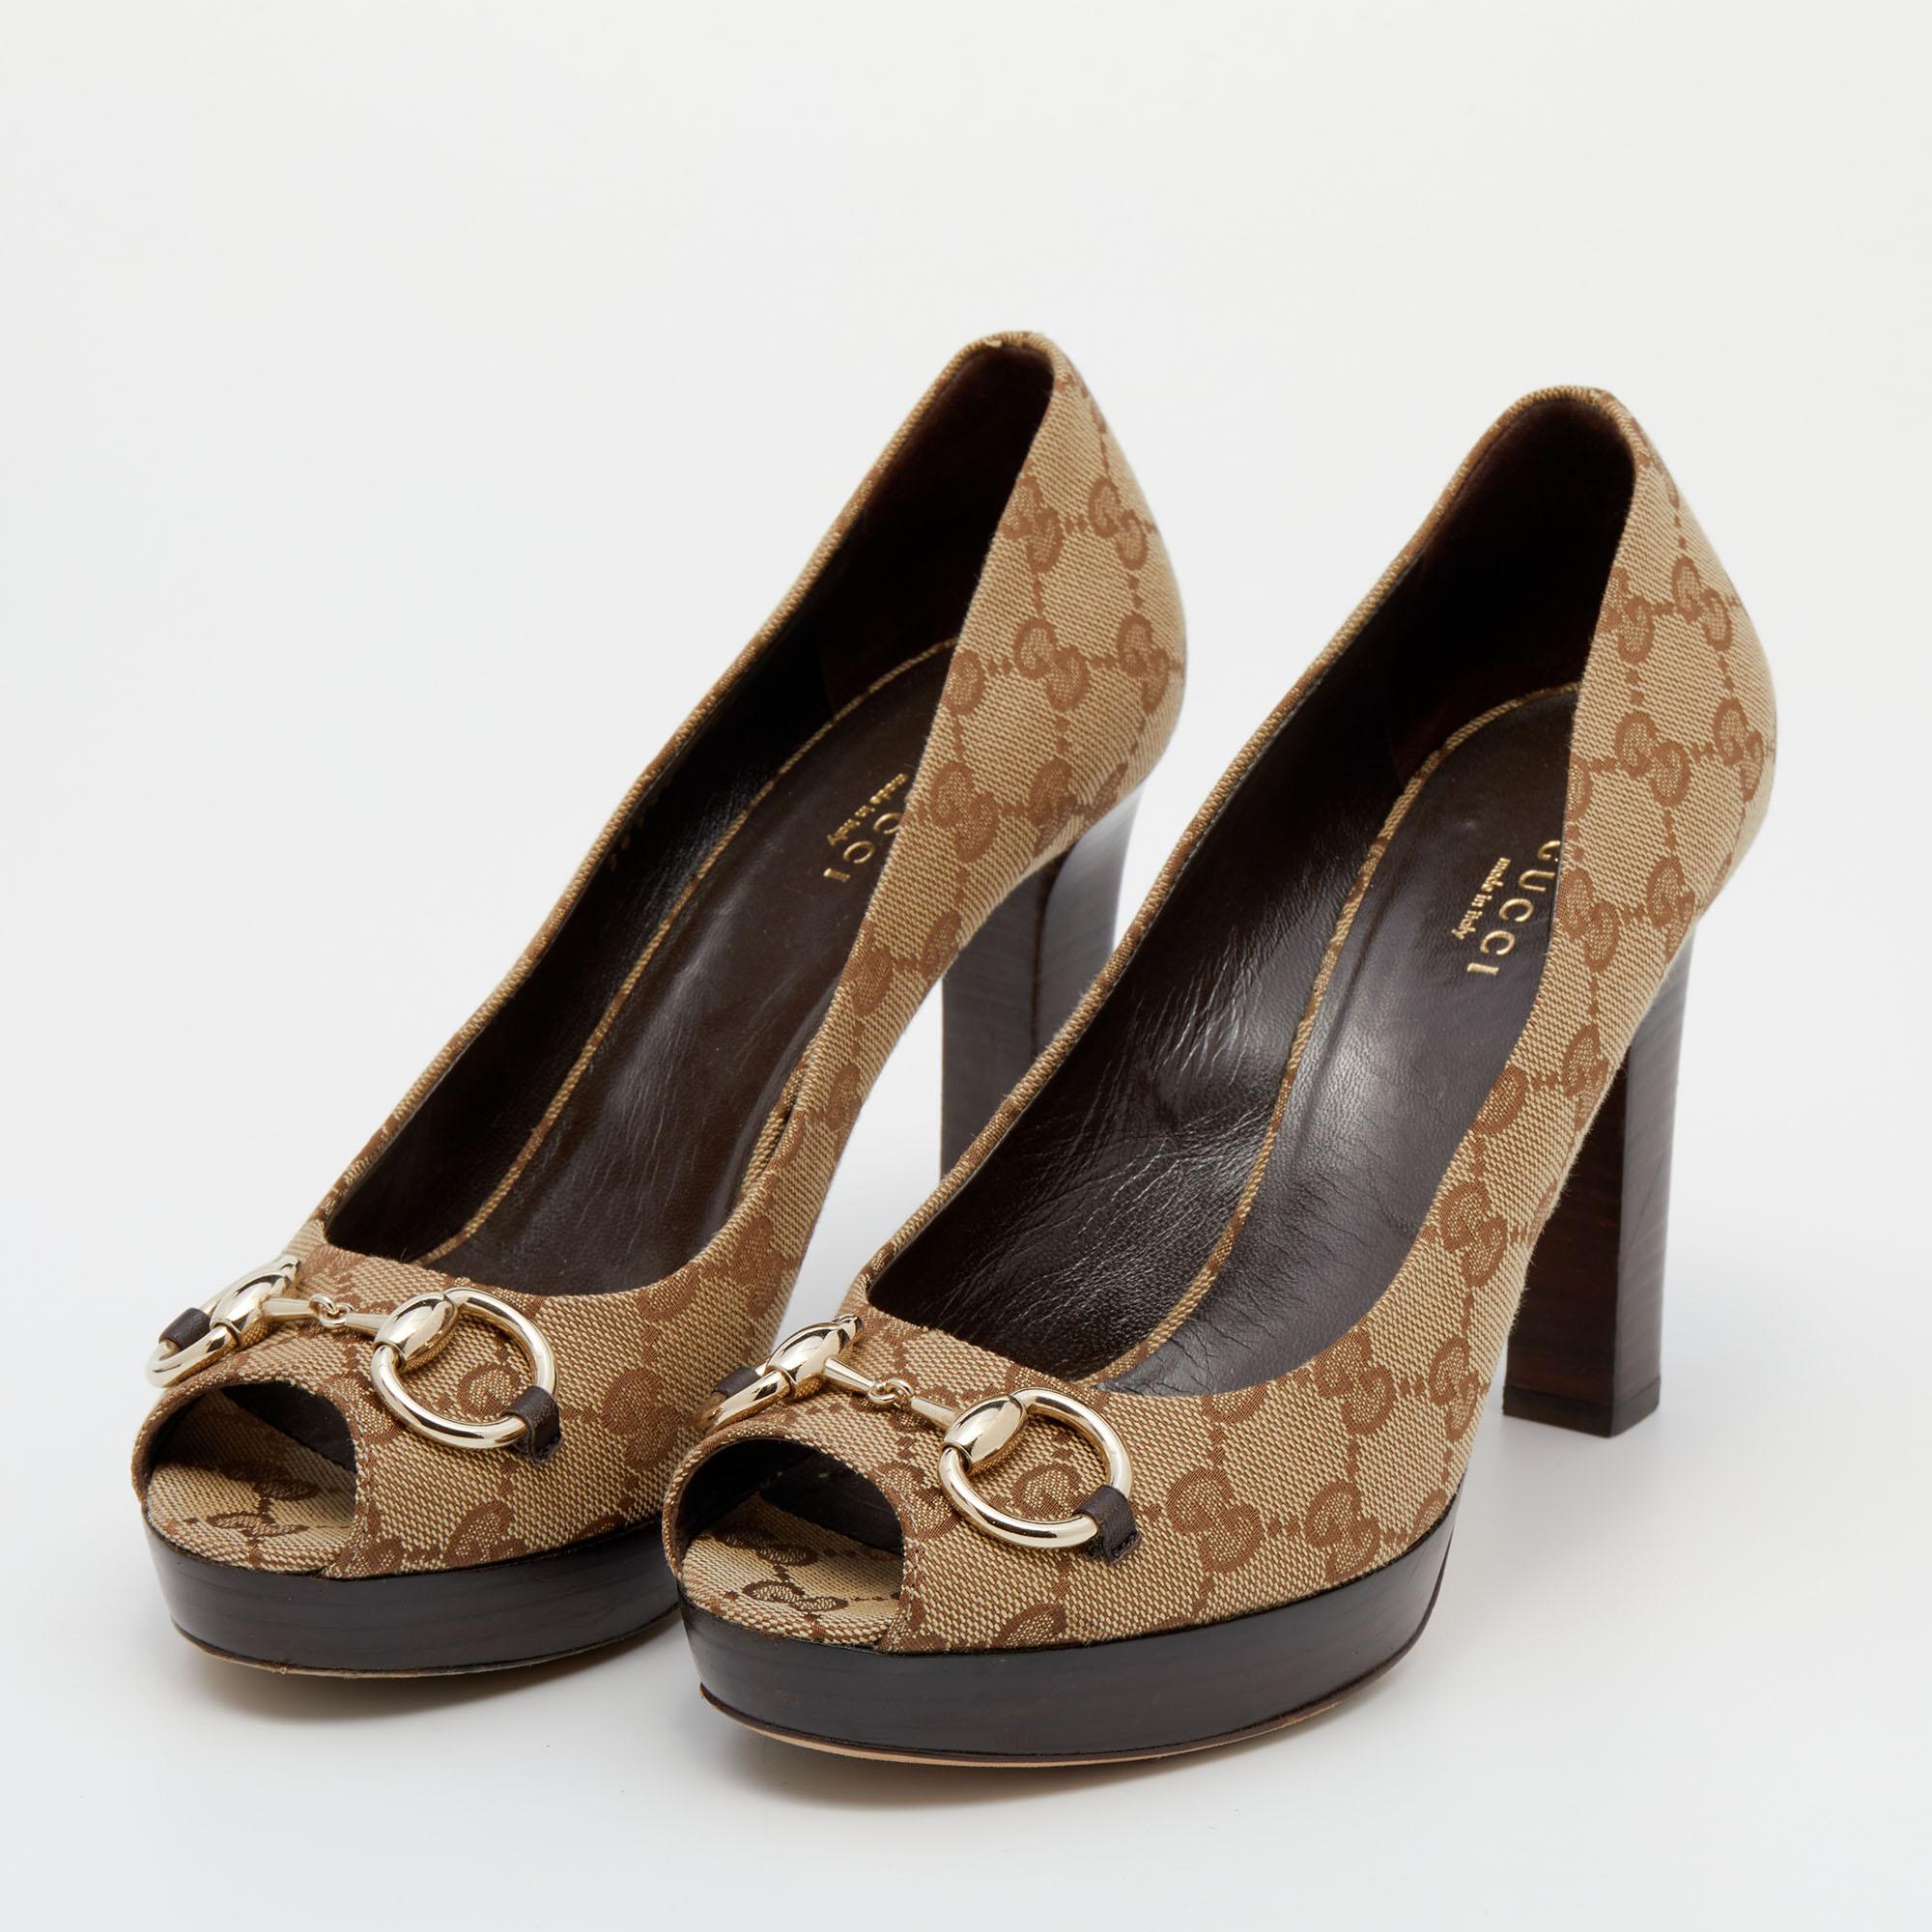 Gucci's timeless aesthetic and stellar craftsmanship in shoemaking is evident in these stunning pumps. Crafted from leather and GG canvas, they are topped with the signature Horsebit accent and mounted on tall heels for the right amount of